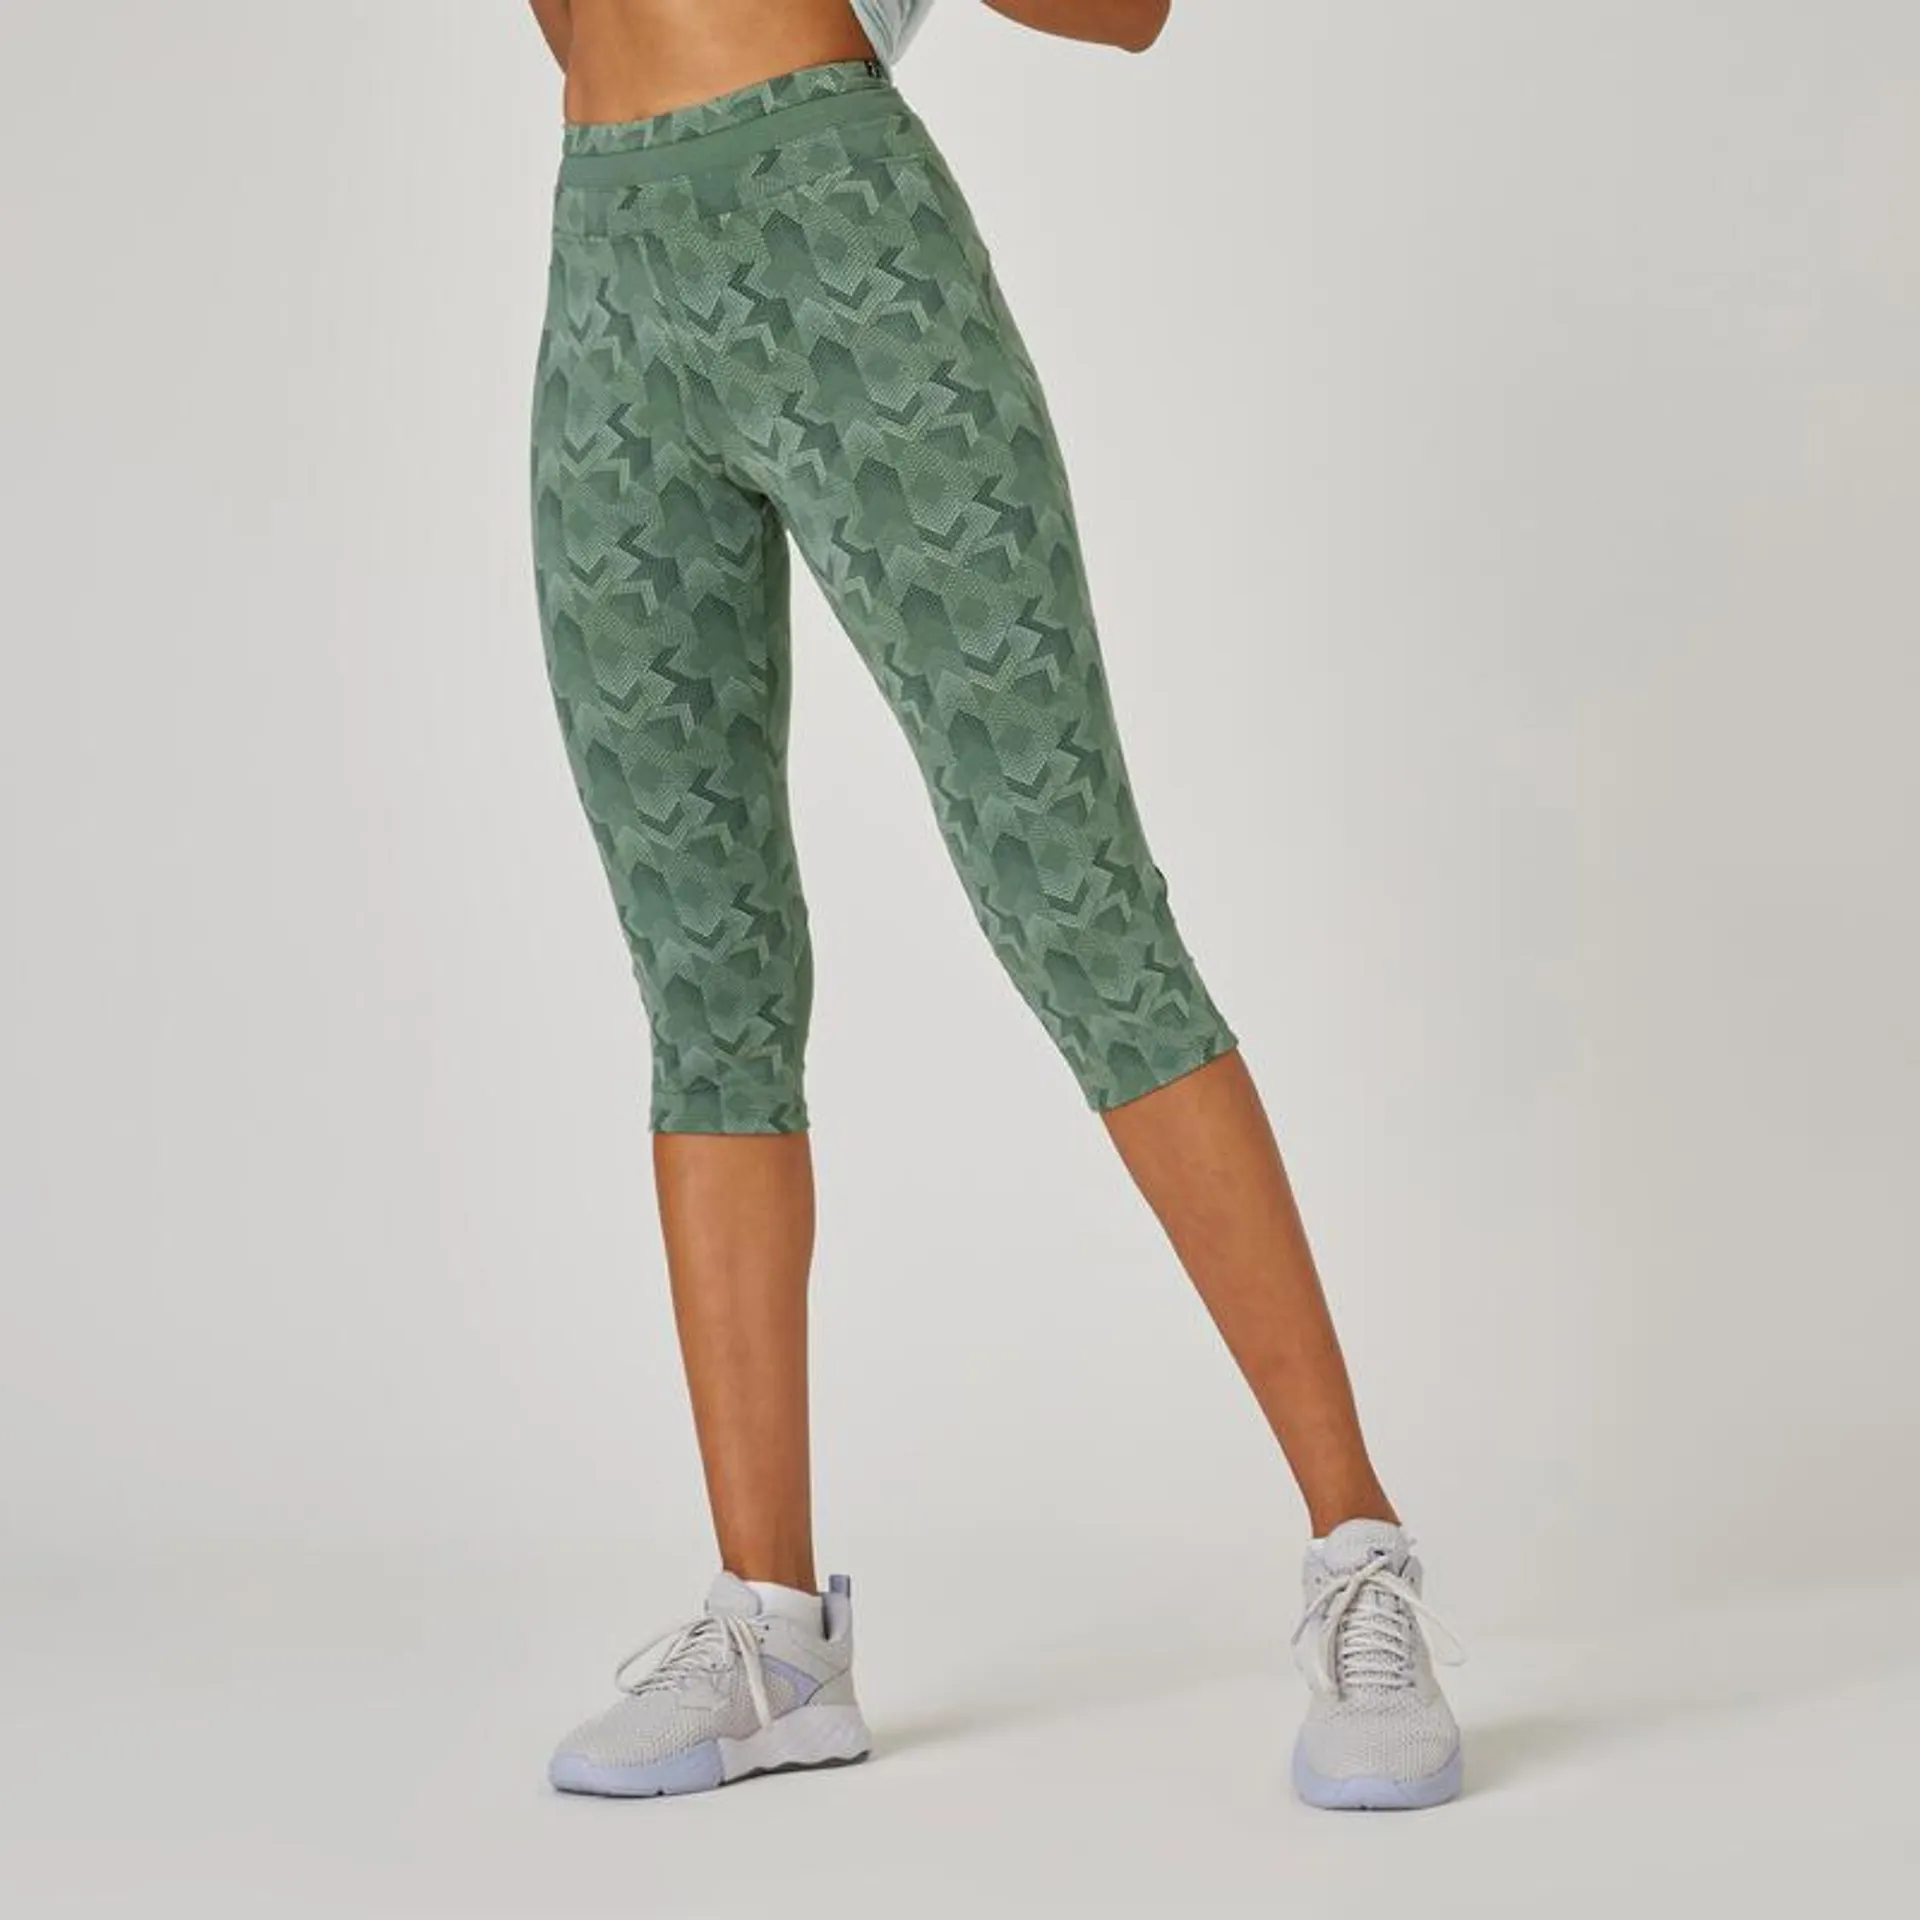 Majority Cotton Fitness Cropped Bottoms 520 - Green Print